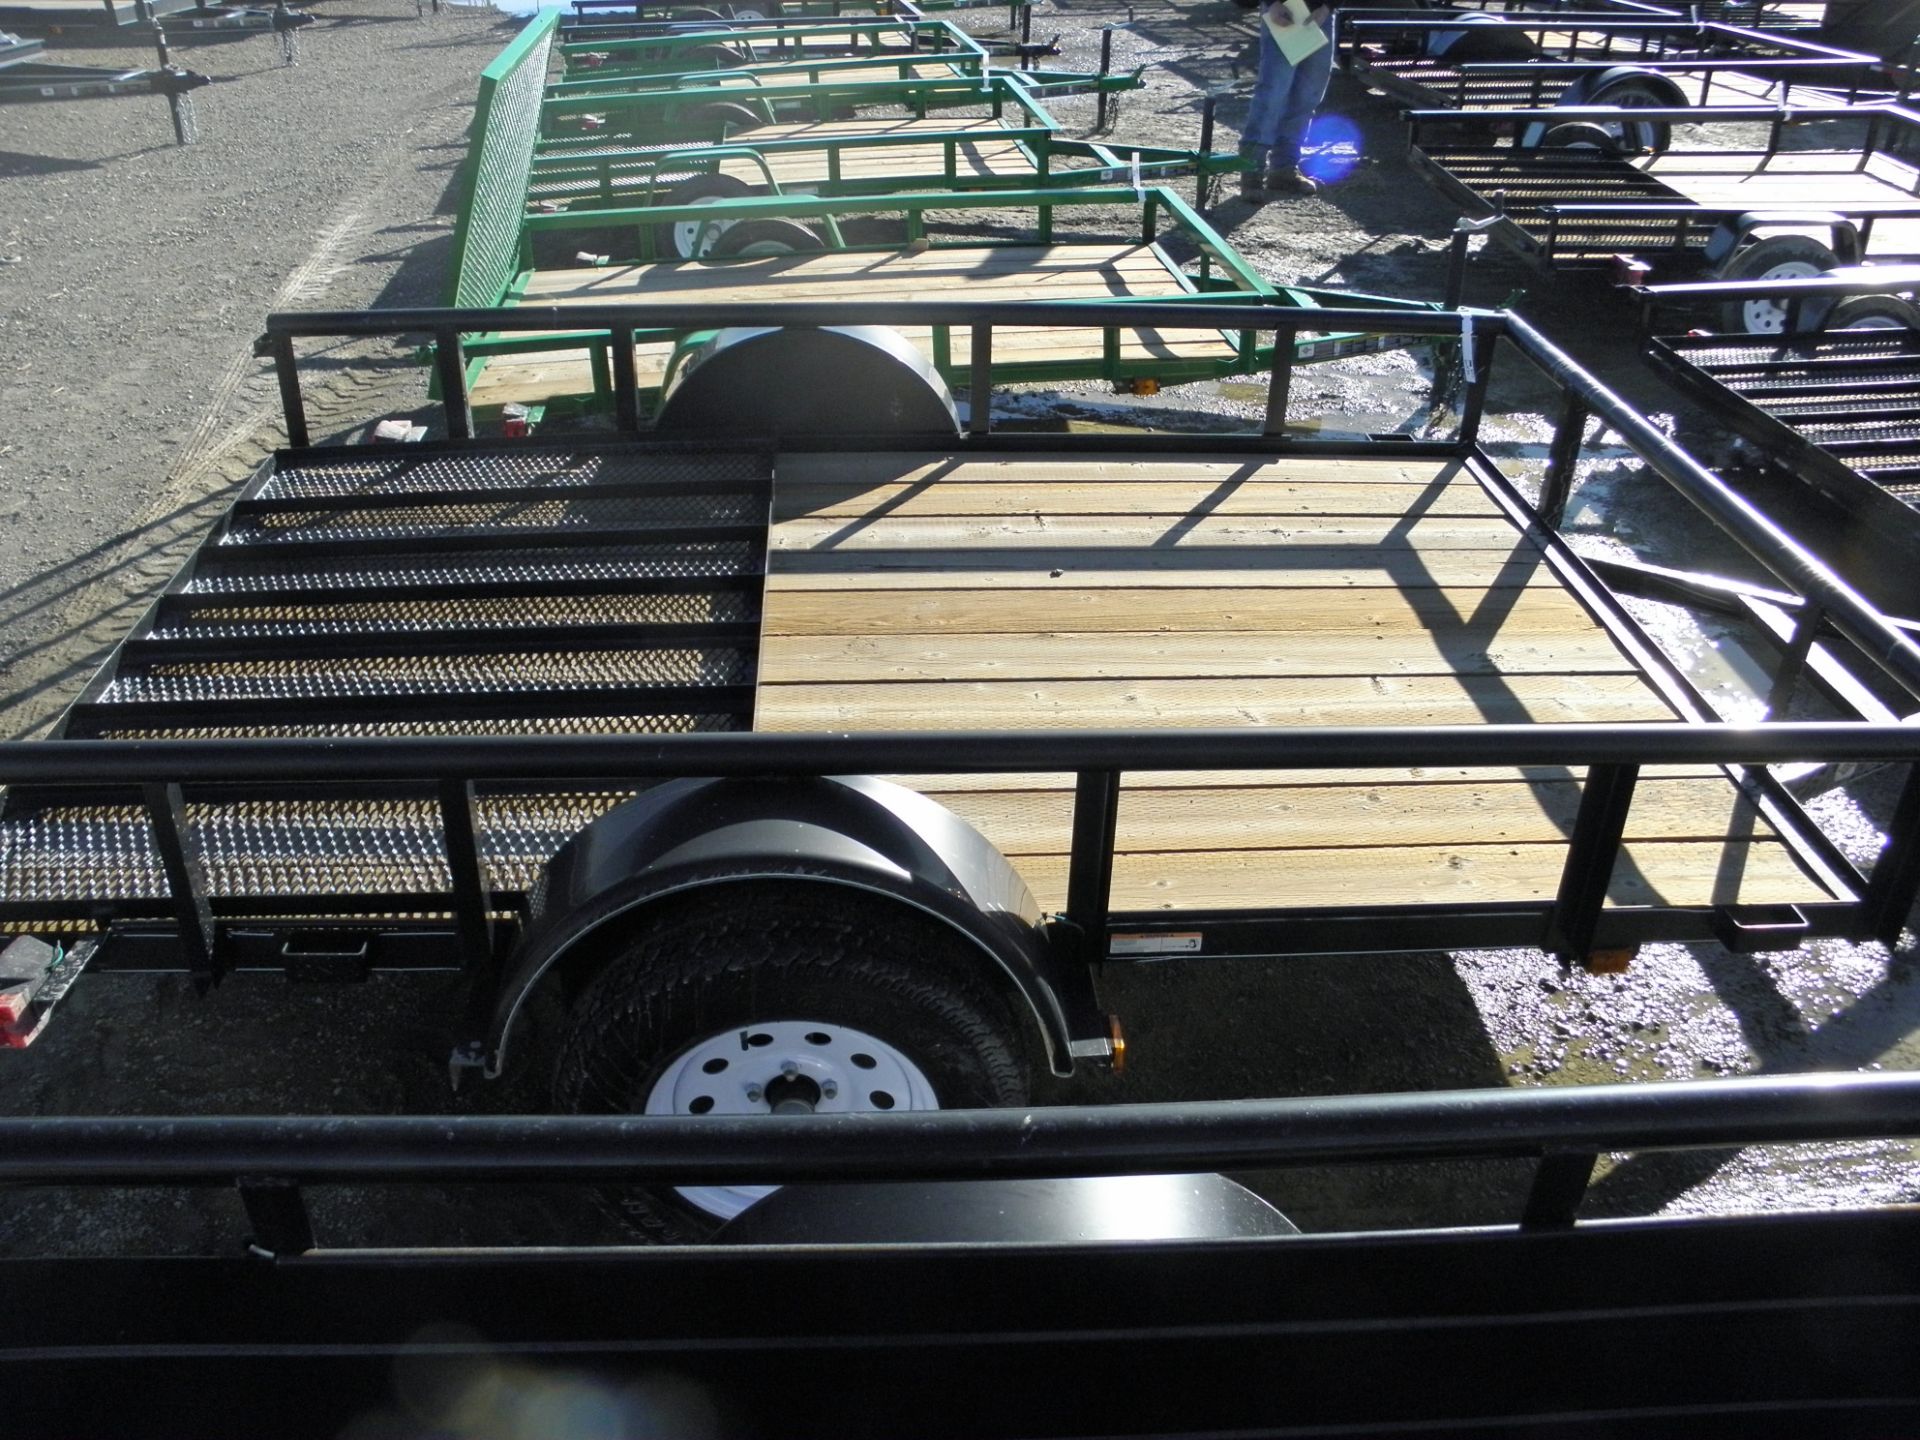 6' X 10' single axle flatbed, pipe rail, expanded metal fold up ramp, wood deck